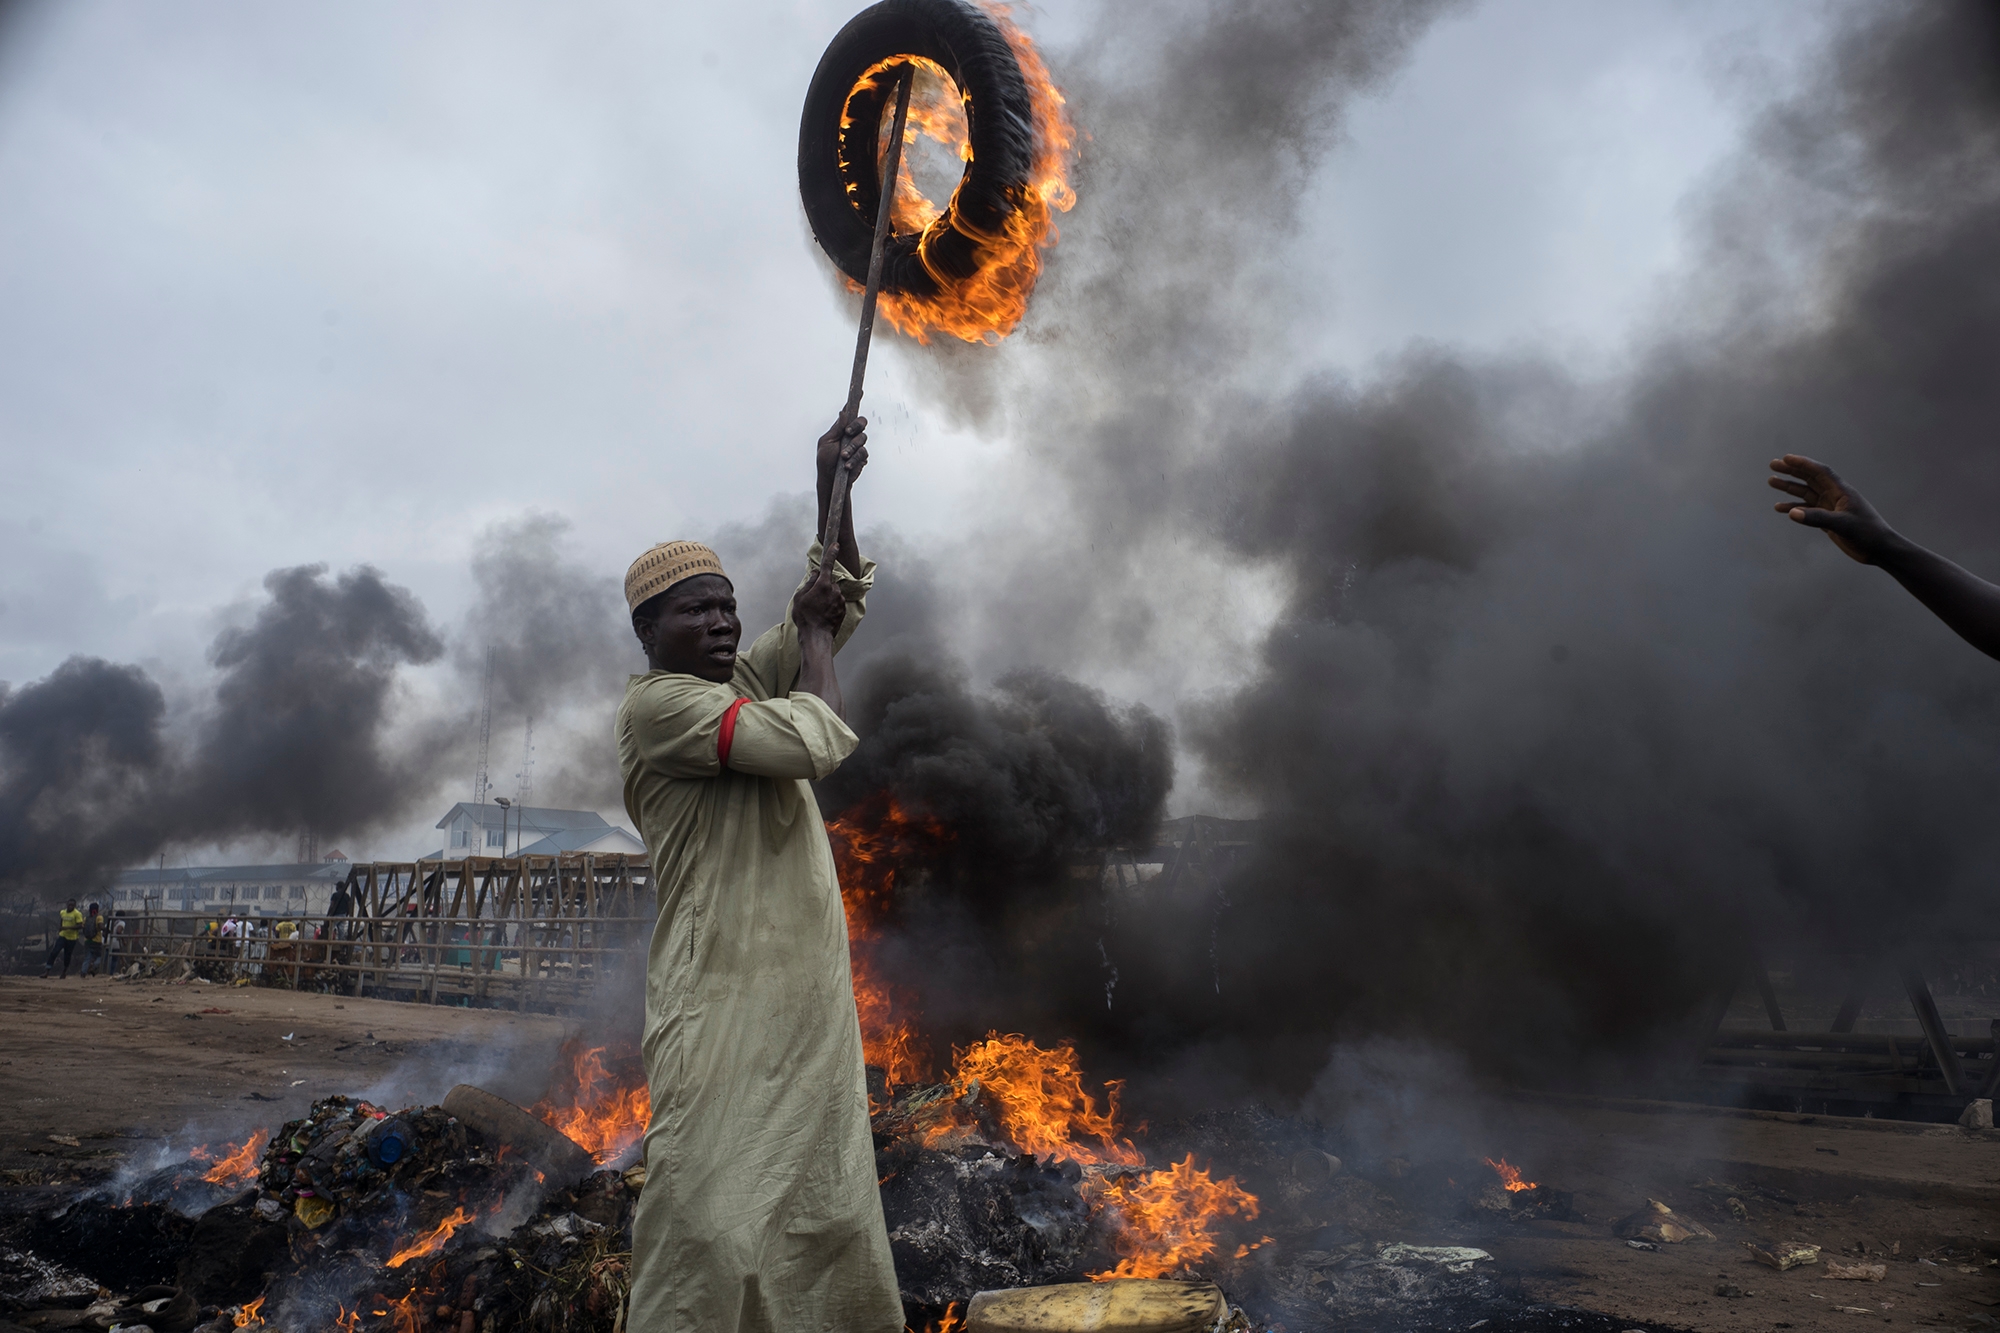 Scene of displaced resident of Agbogbloshie, Accra, Ghana wielding a tire on fire as the landscape burns